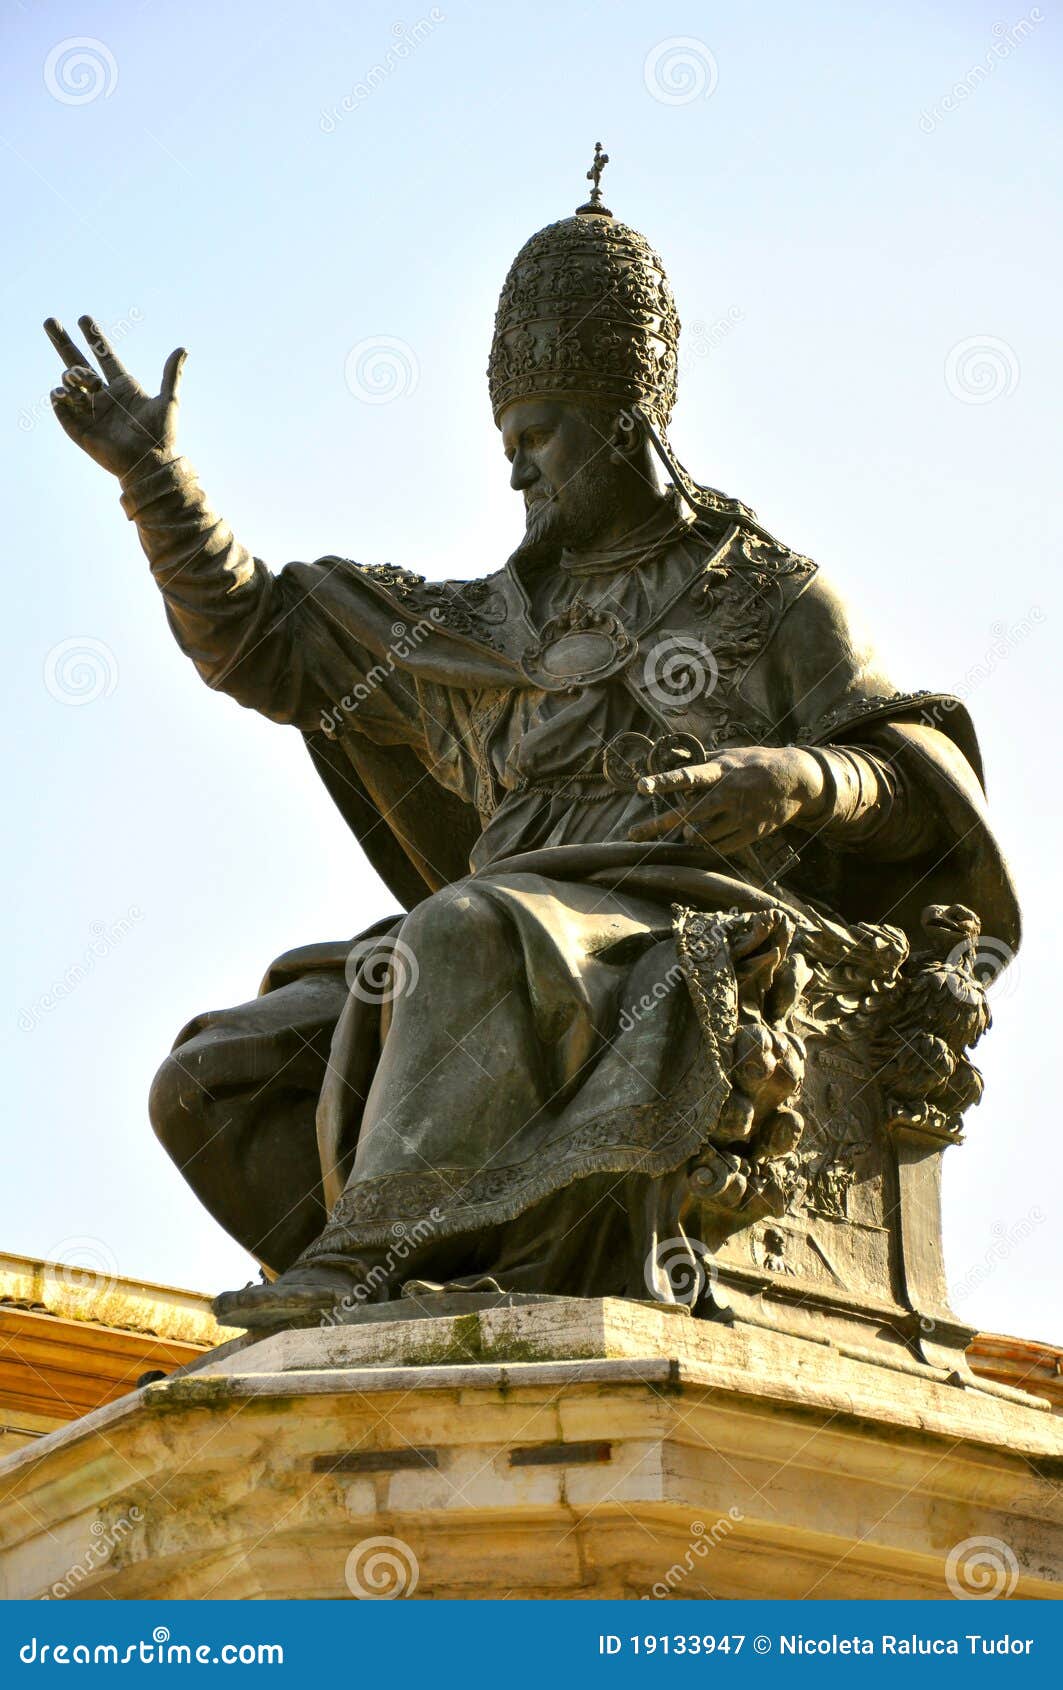 statue of pope v in italy